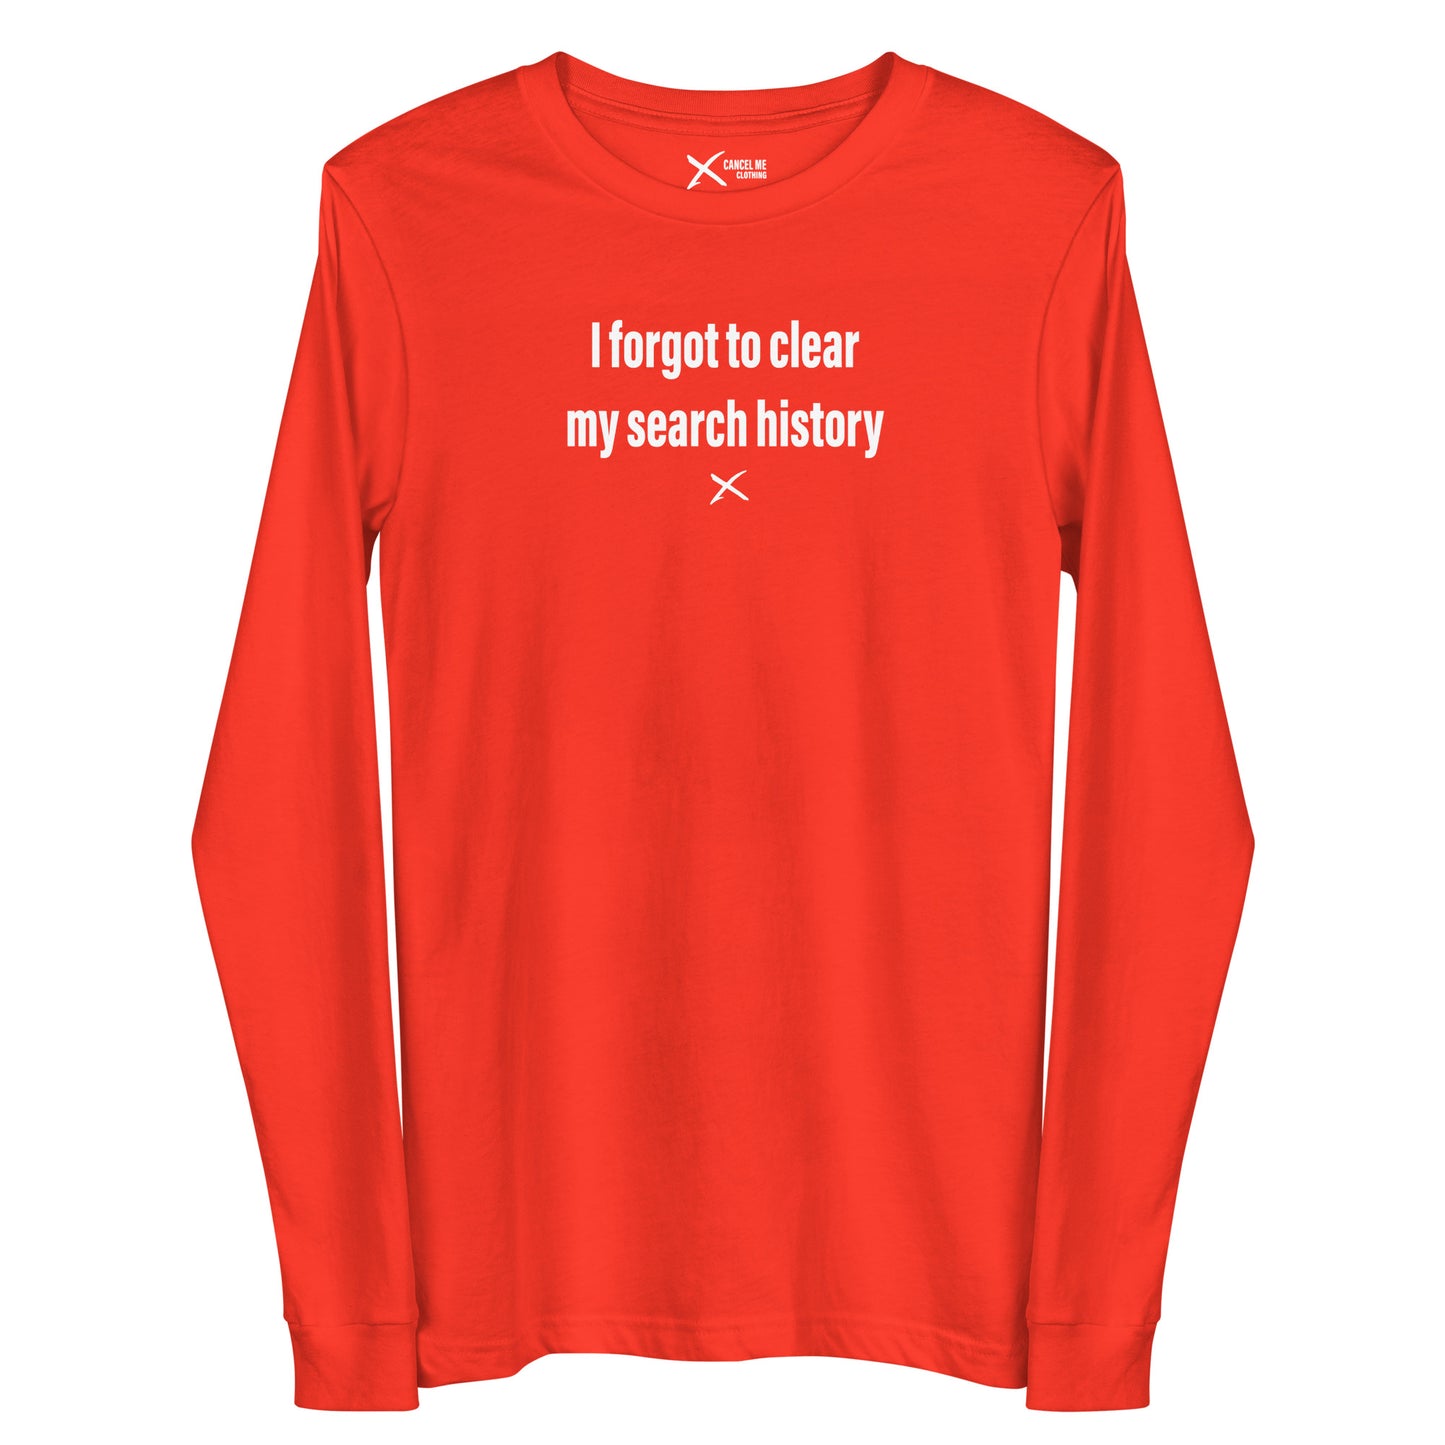 I forgot to clear my search history - Longsleeve